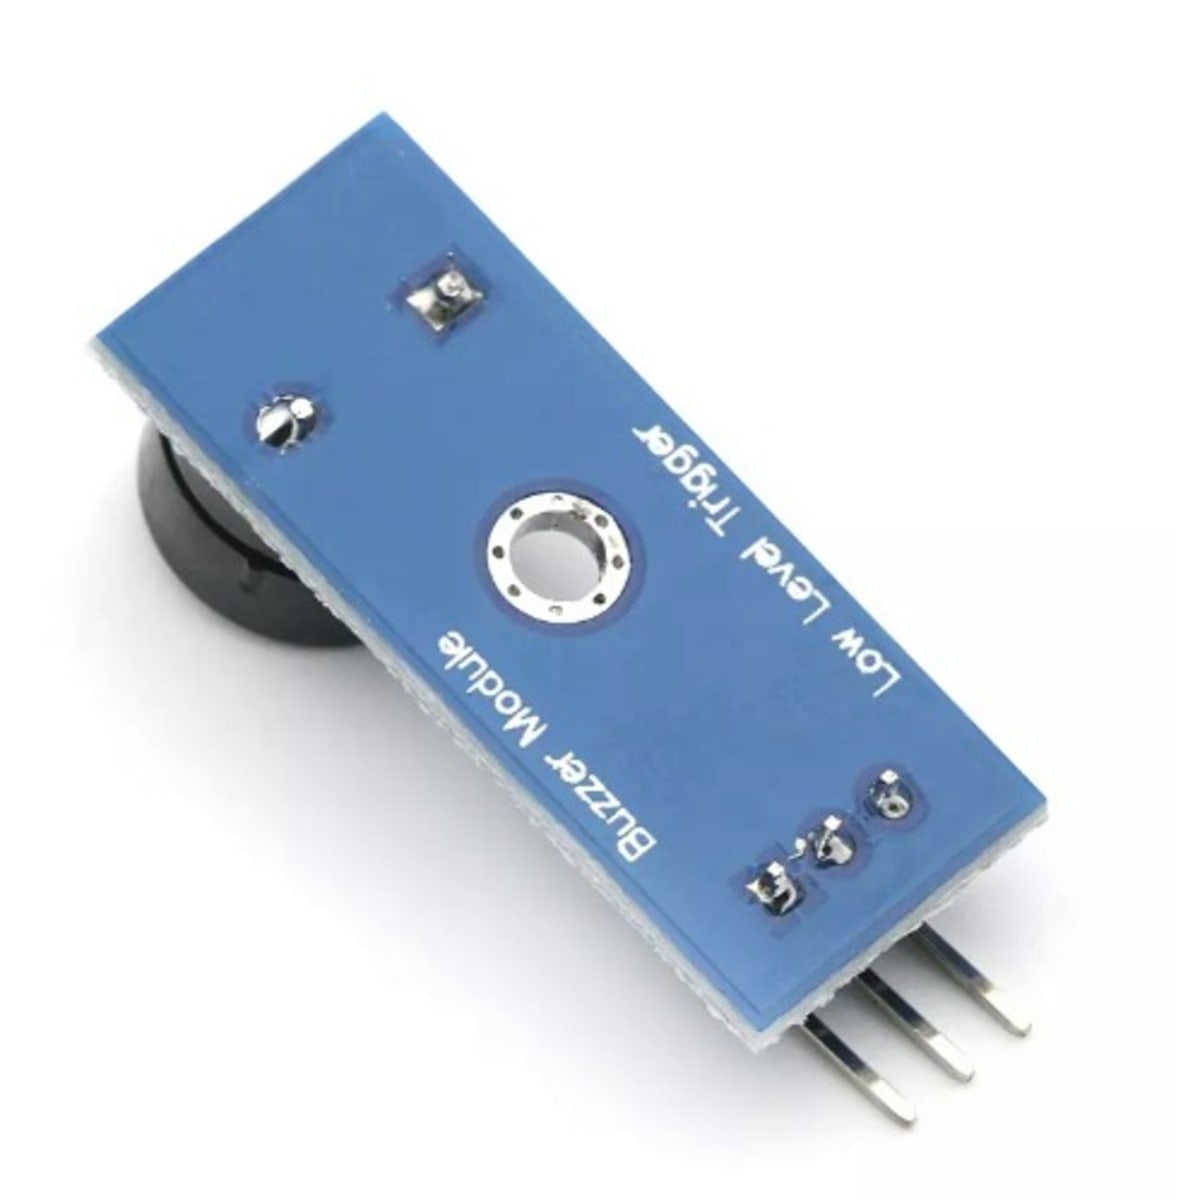 Buy 5V Active Alarm Buzzer Module Low current for Arduino online at